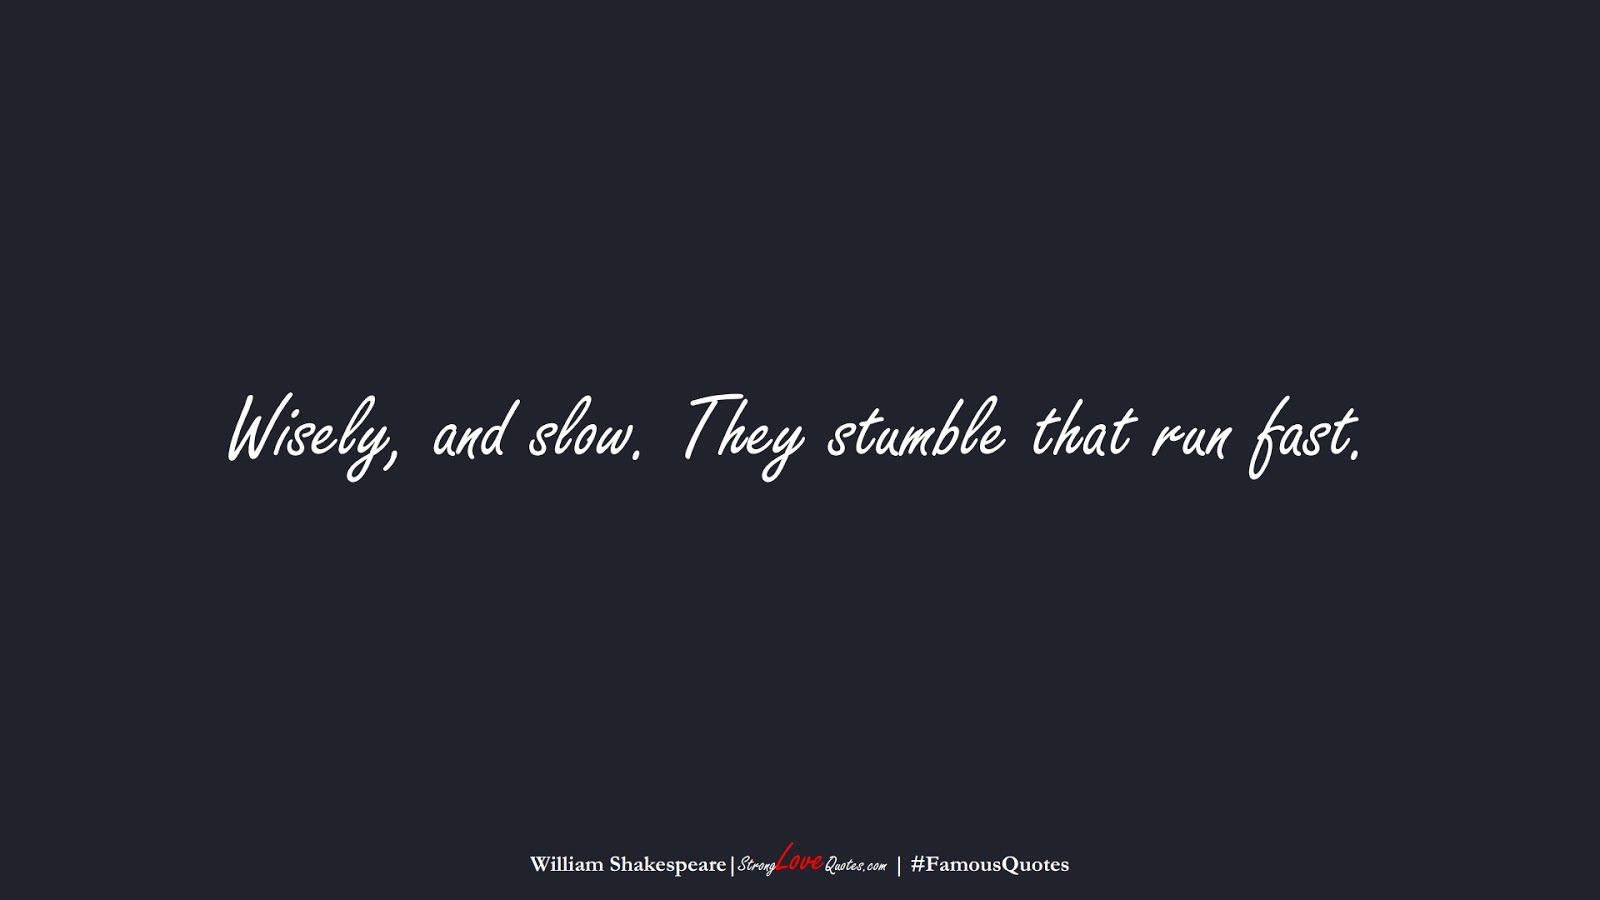 Wisely, and slow. They stumble that run fast. (William Shakespeare);  #FamousQuotes